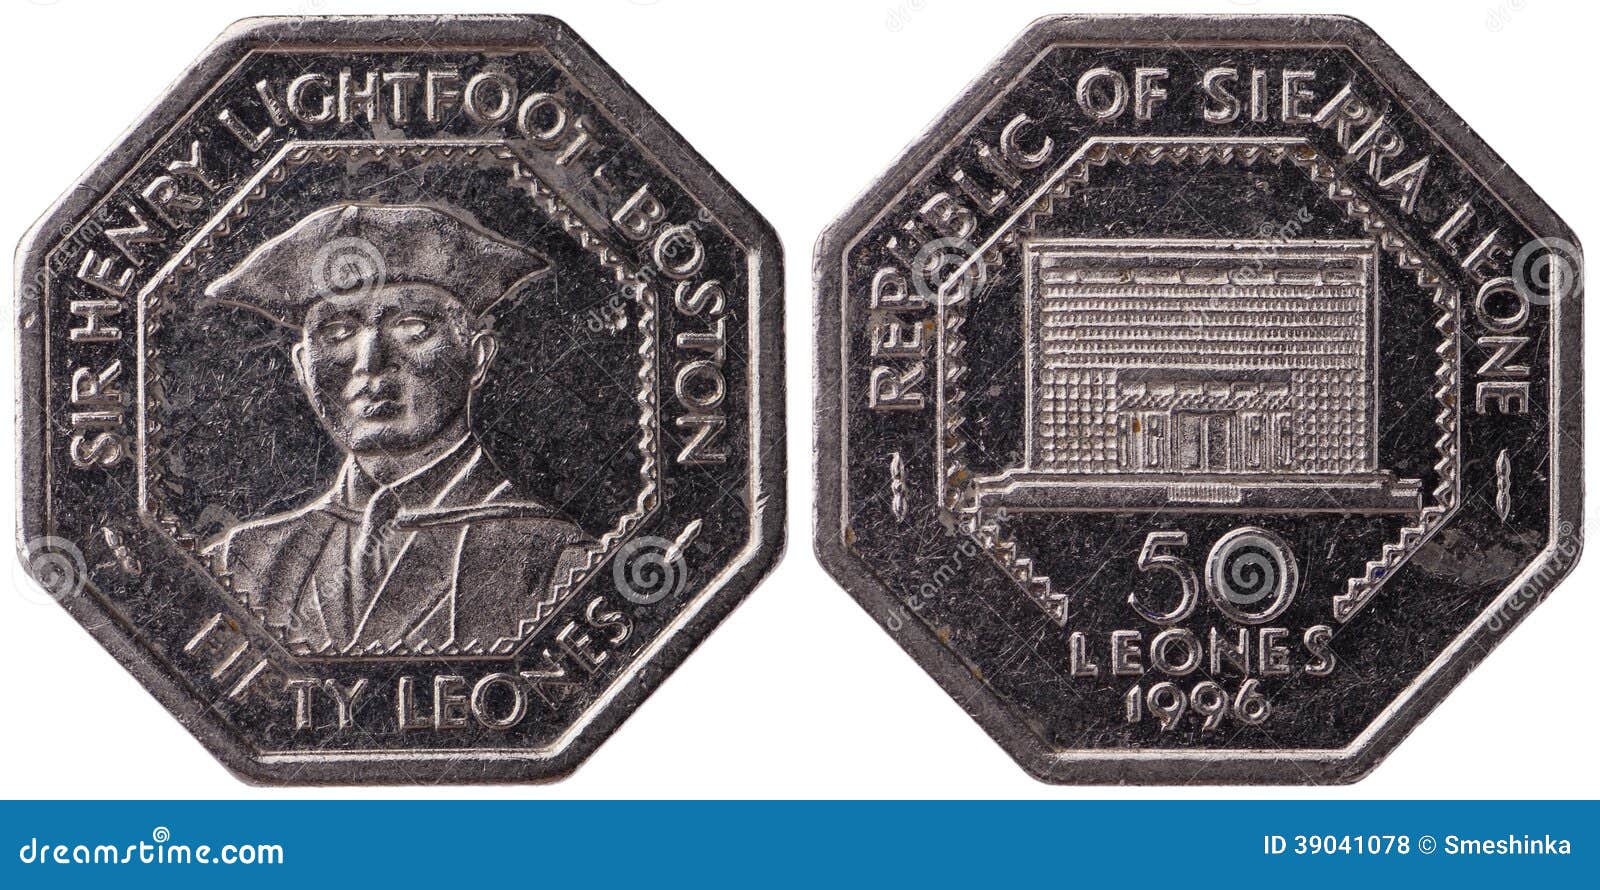 50 sierra leonean leones coin, 1996, both sides,